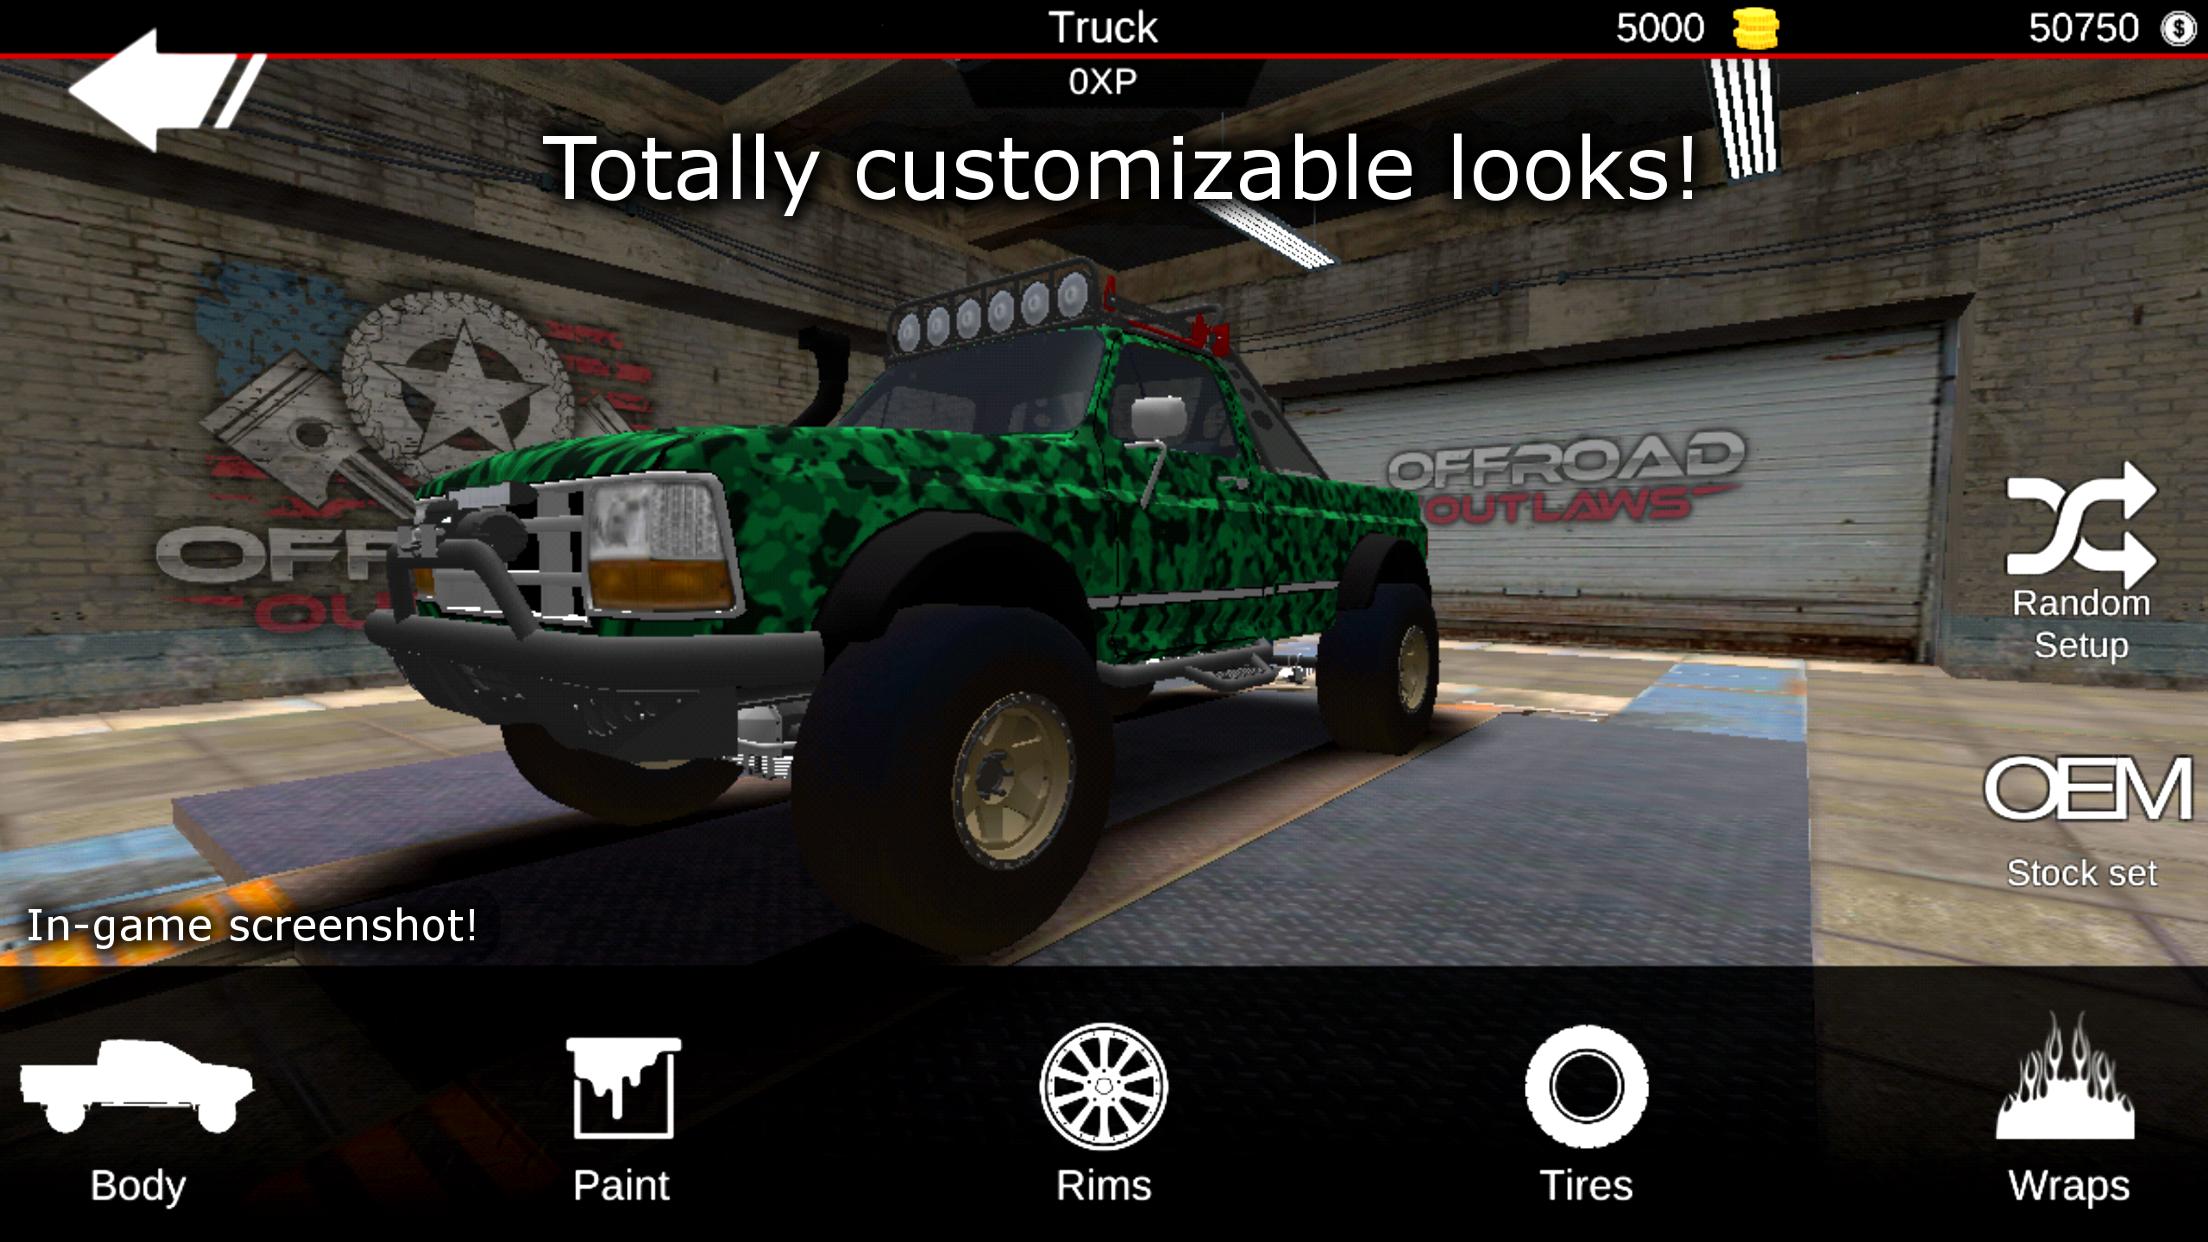 Offroad Outlaws for Android - APK Download - 